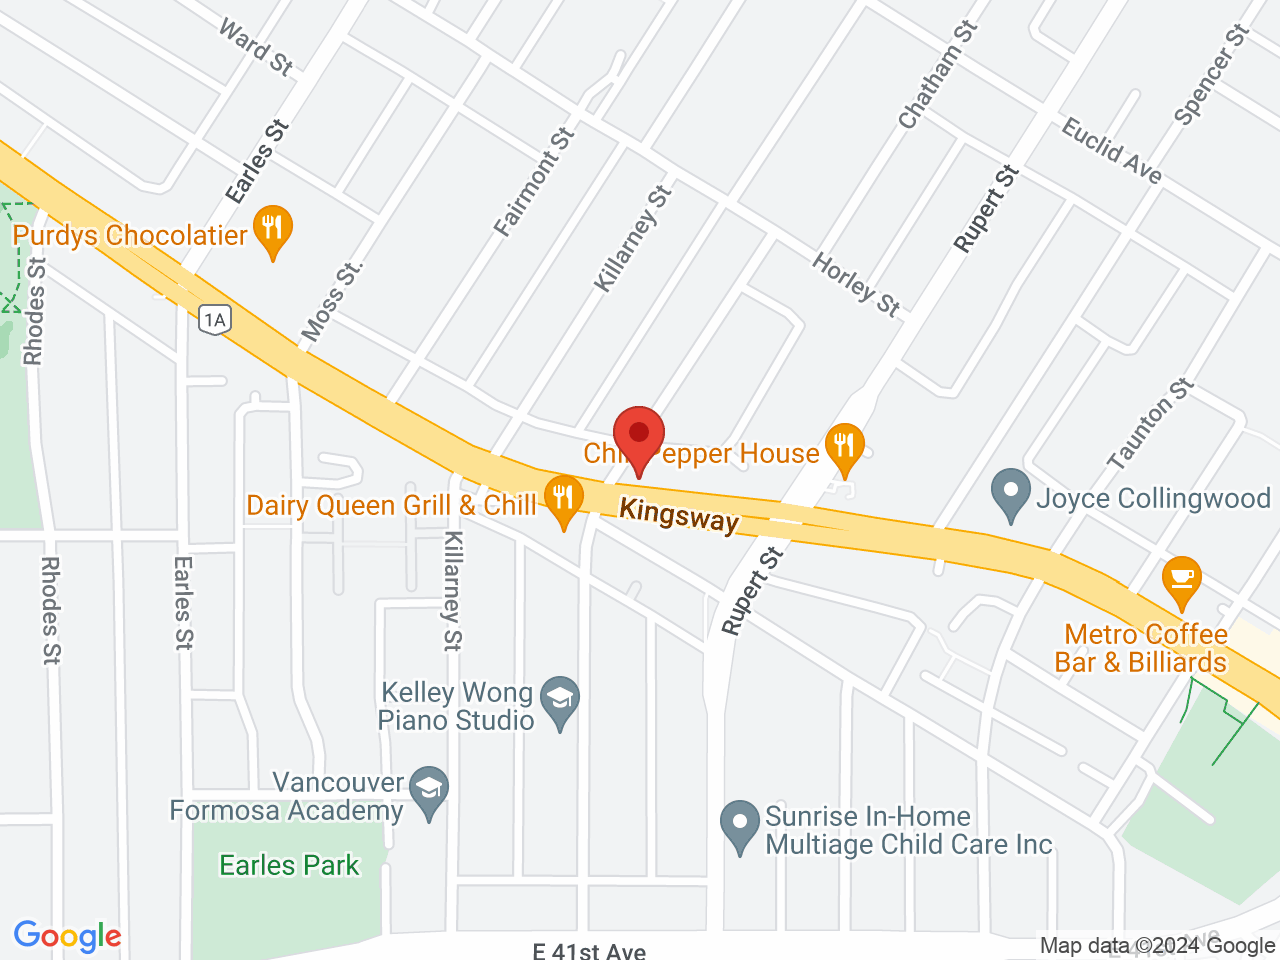 Street map for Sunrise Cannabis, 2943 Kingsway, Vancouver BC